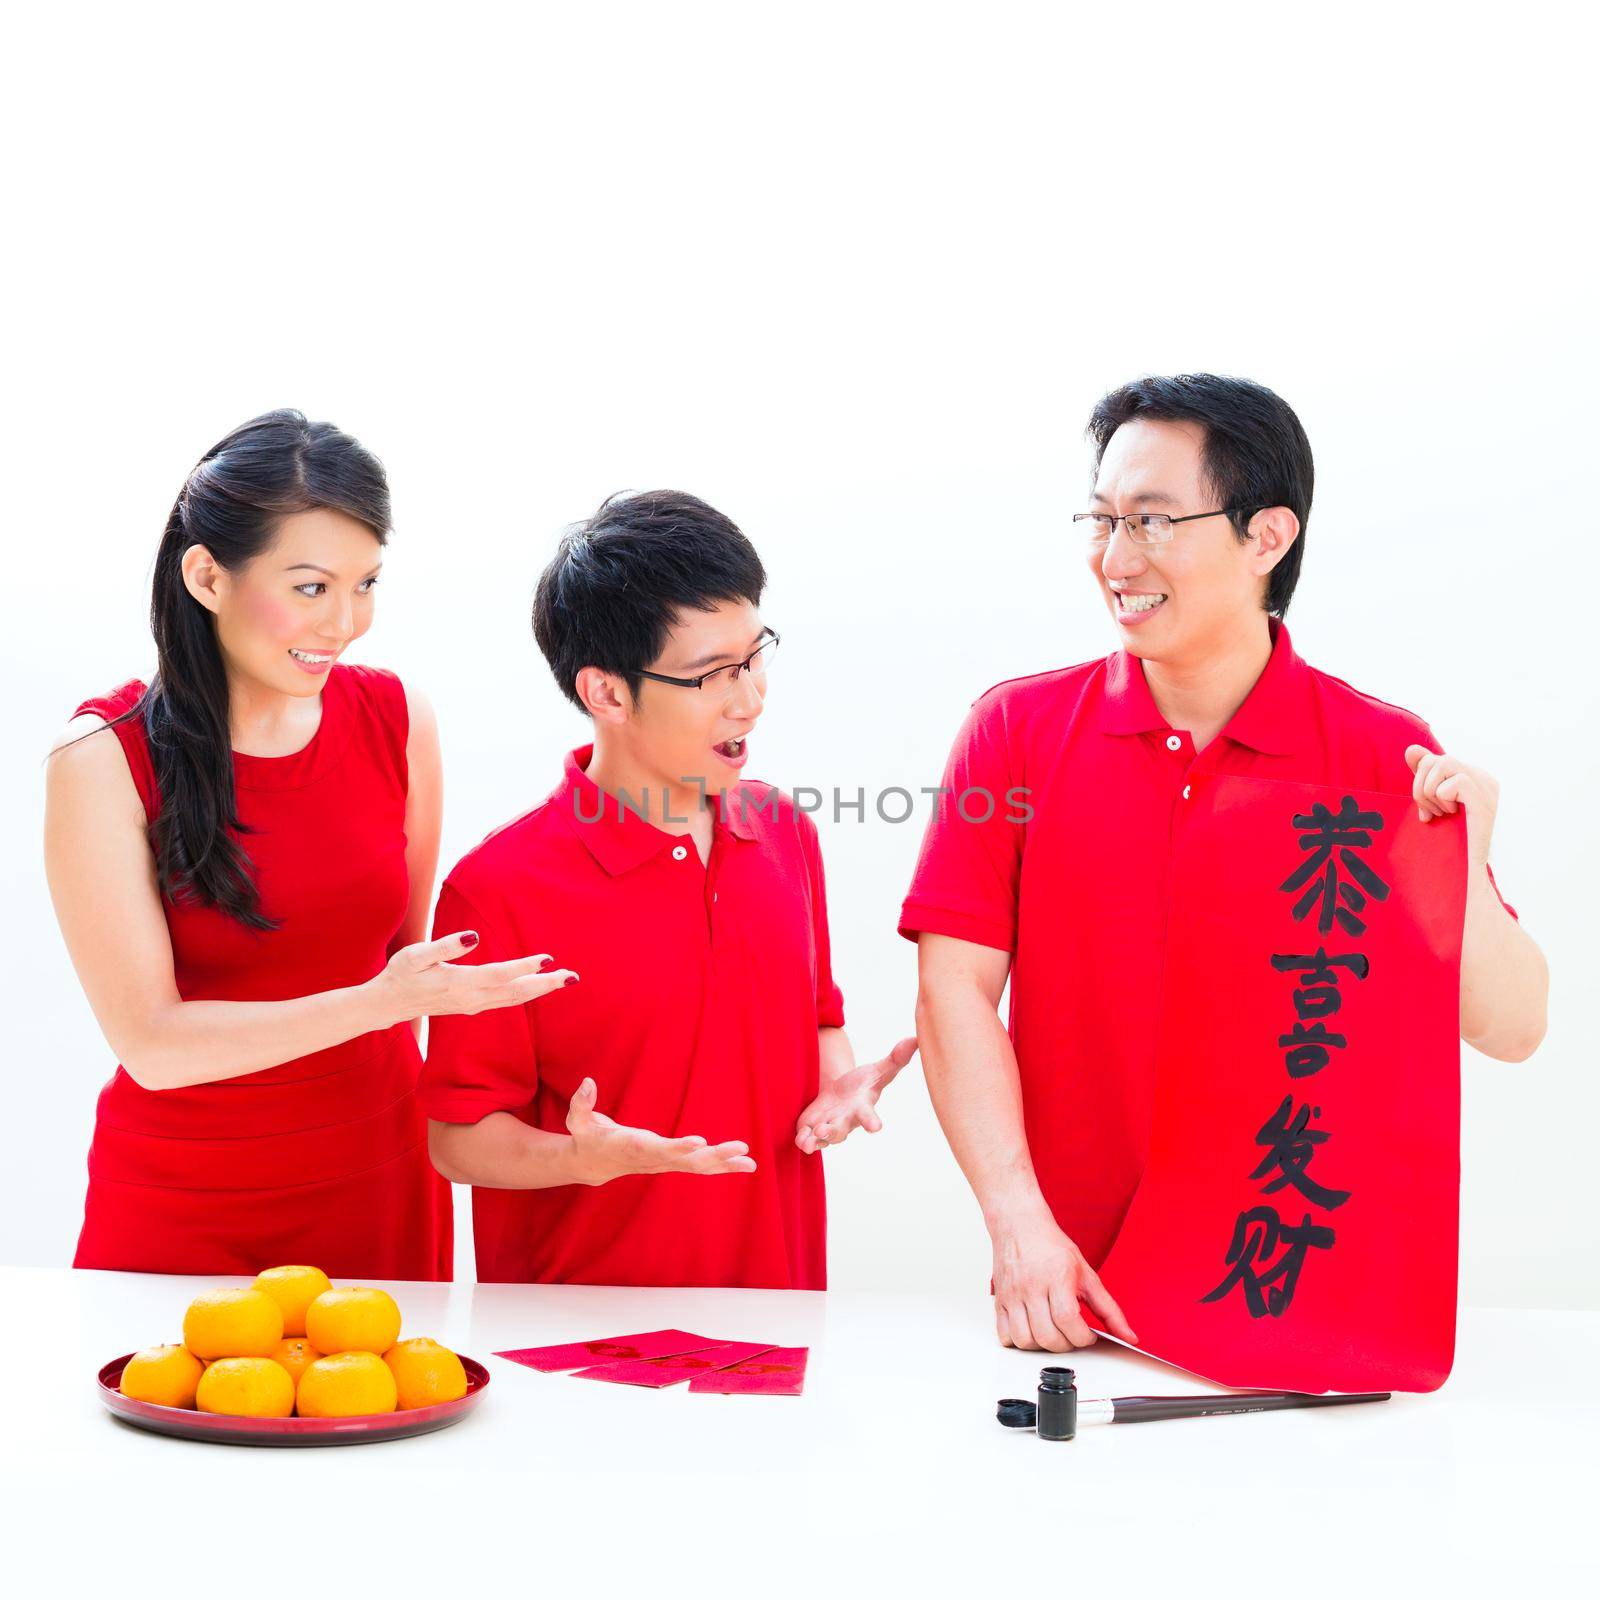 Friends family celebrate Chinese new year with traditional calligraphy, wearing red shirts